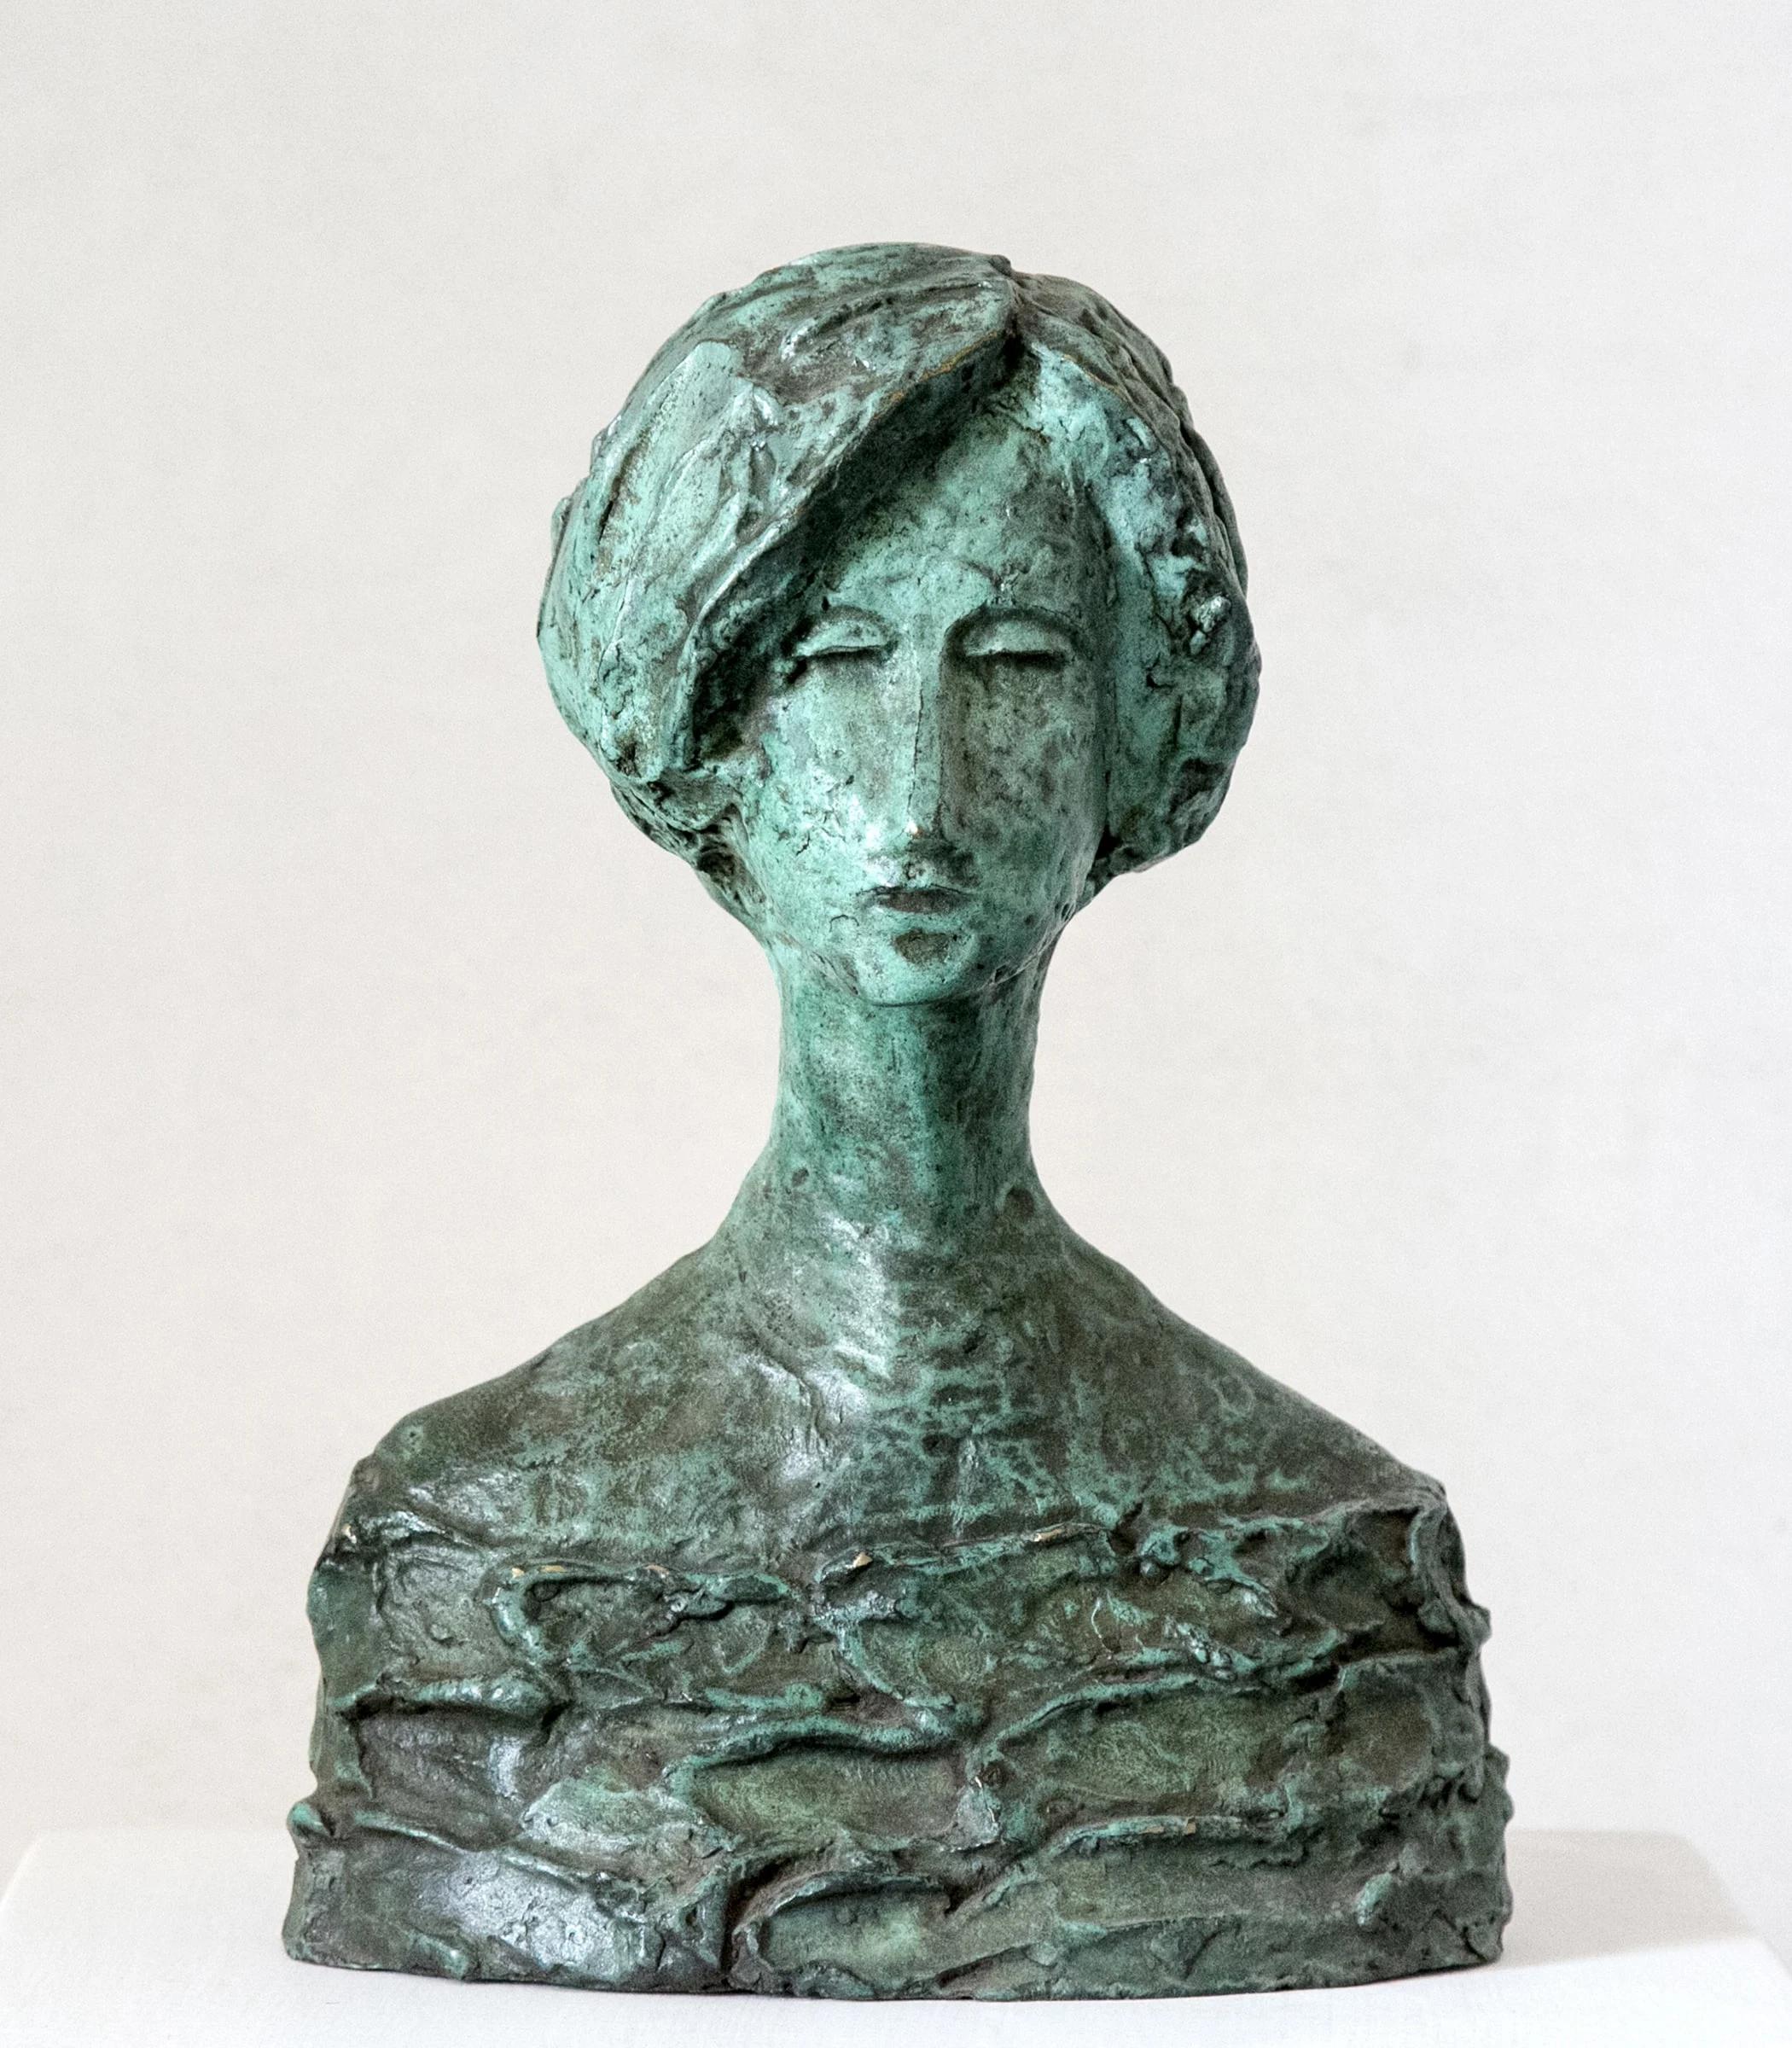 "Agat" Bronze Sculpture 13" x 9" x 5.5" inch by Sarkis Tossonian

Sarkis Tossoonian was born in Alexandria in 1953. He graduated from the Faculty of Fine Arts/Sculpture in 1979. He started exhibiting in individual and group exhibitions in Alexandria